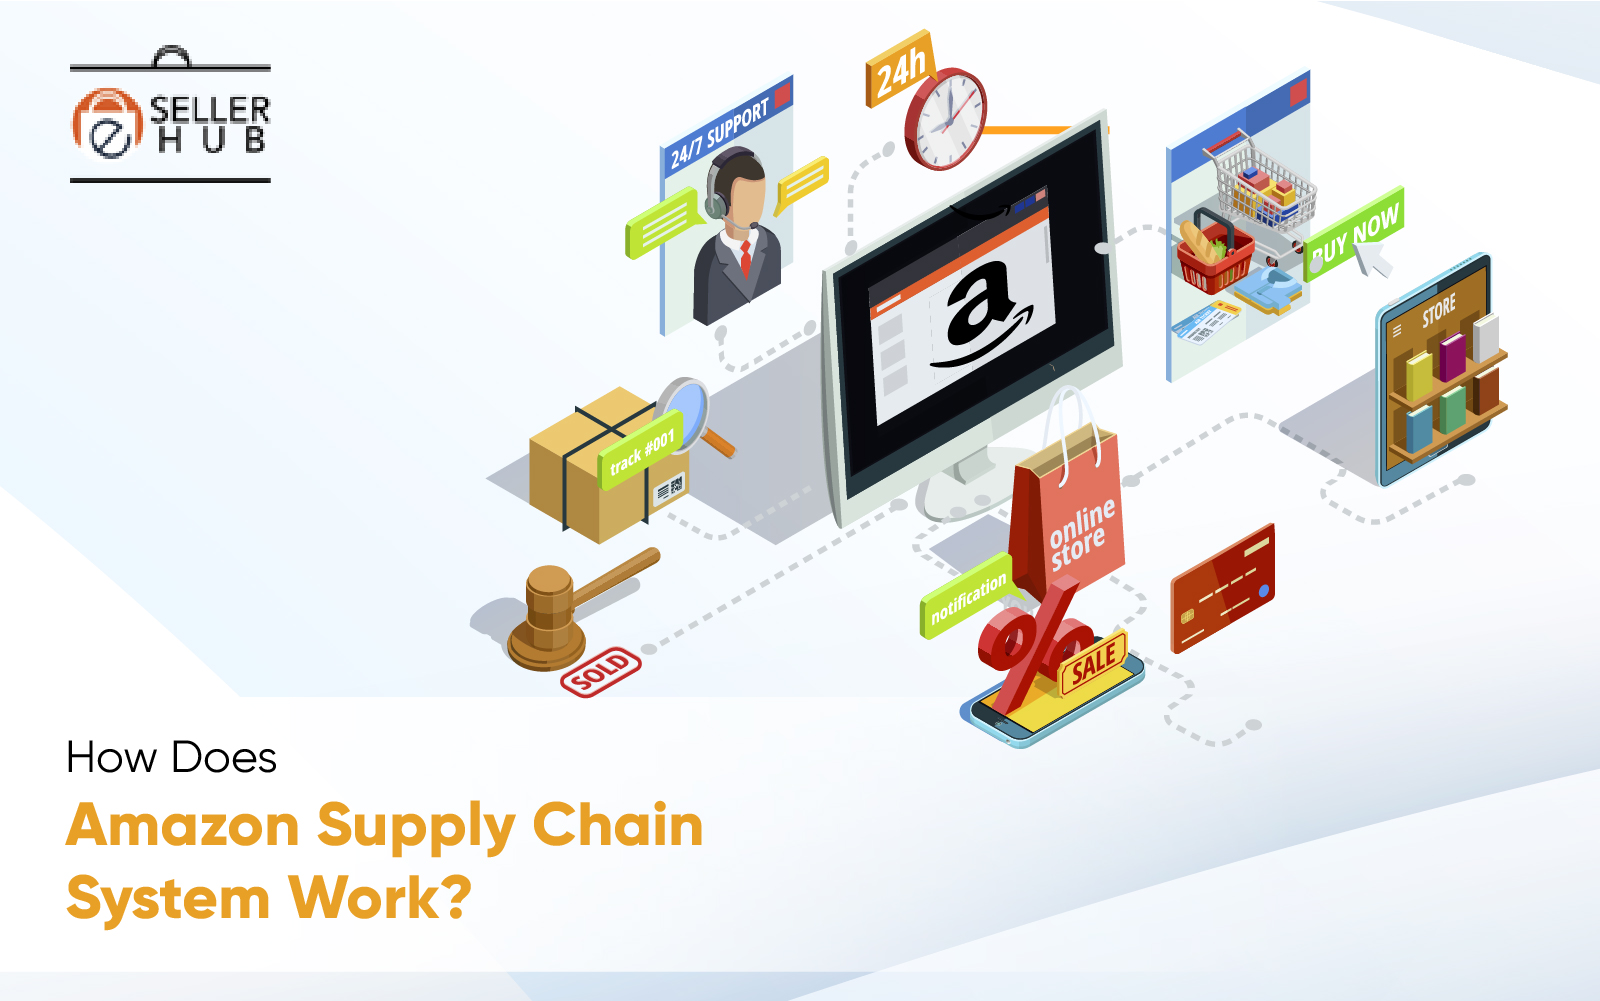 How Does Amazon Supply Chain System Work? | eSellerHub